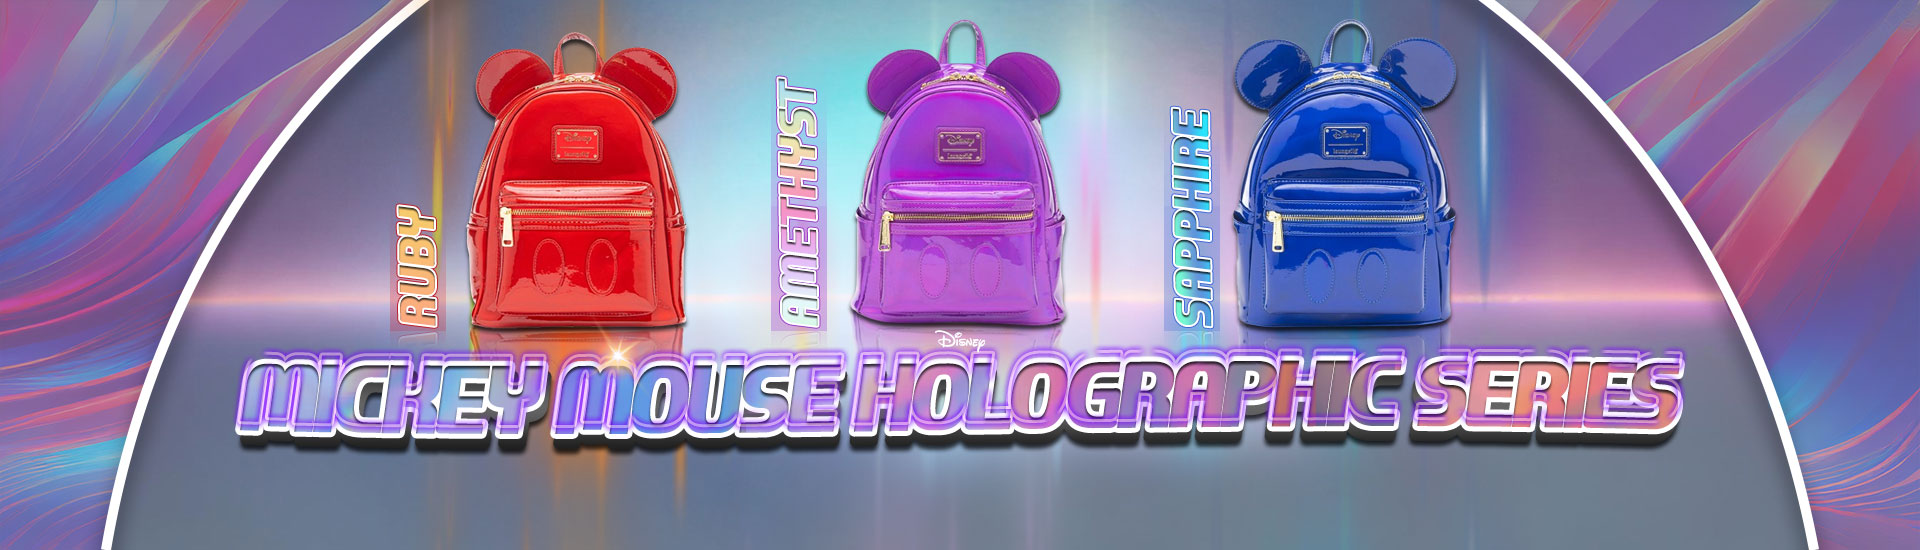 707 Street's Exclusive Mickey Mouse Holographic Series Mini Backpacks by Loungefly featuring red, purple and blue bags that cast different colors in the light.